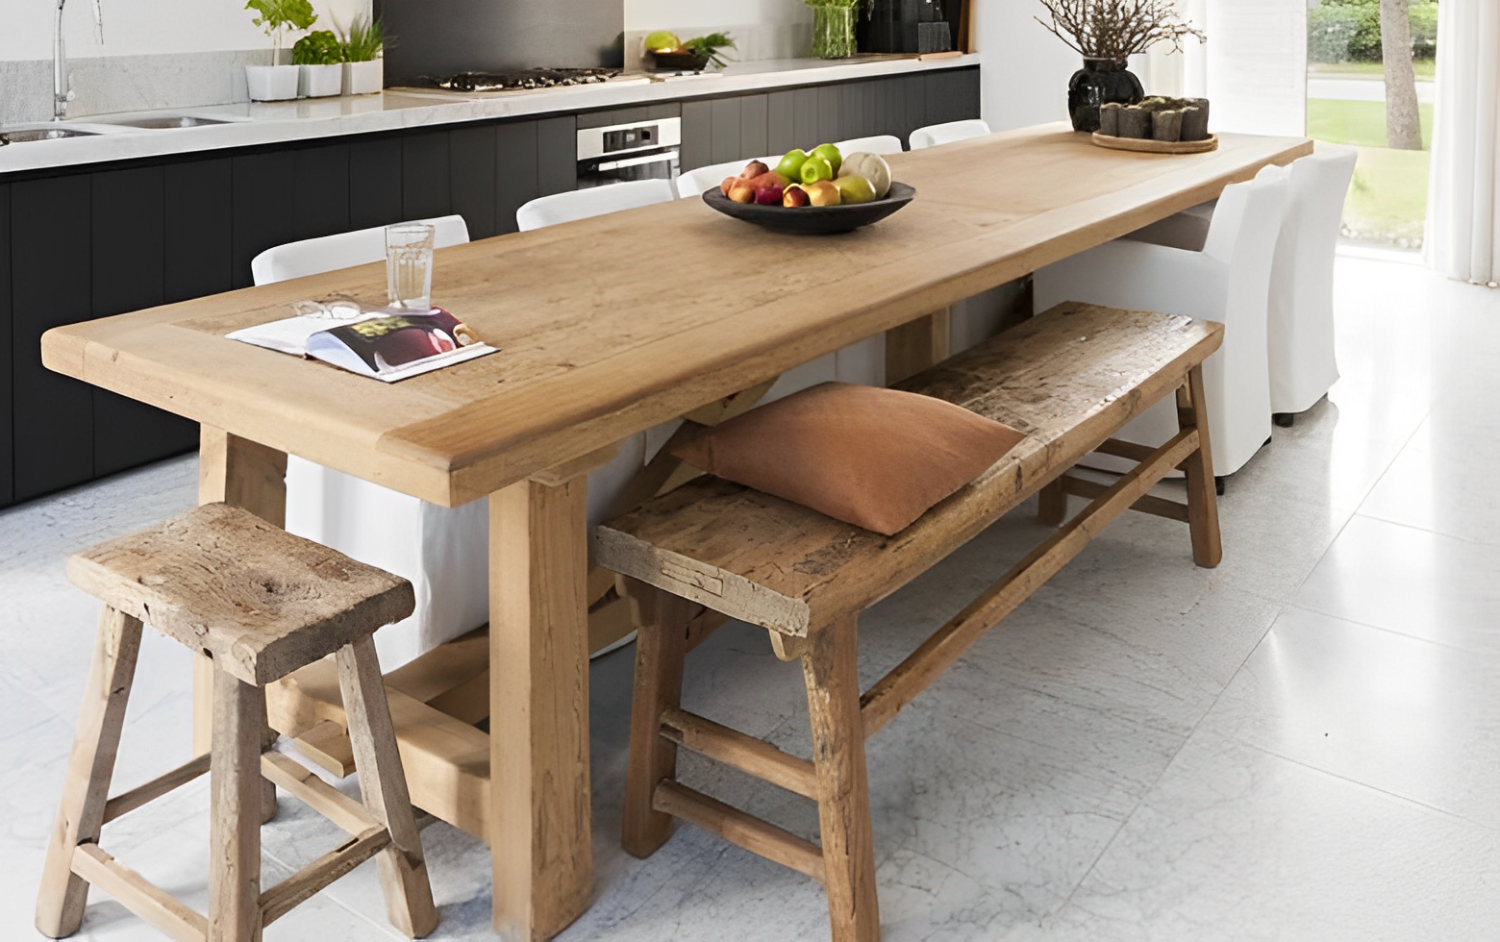 large heavy wood table as kitchen island with wooden benches of same material